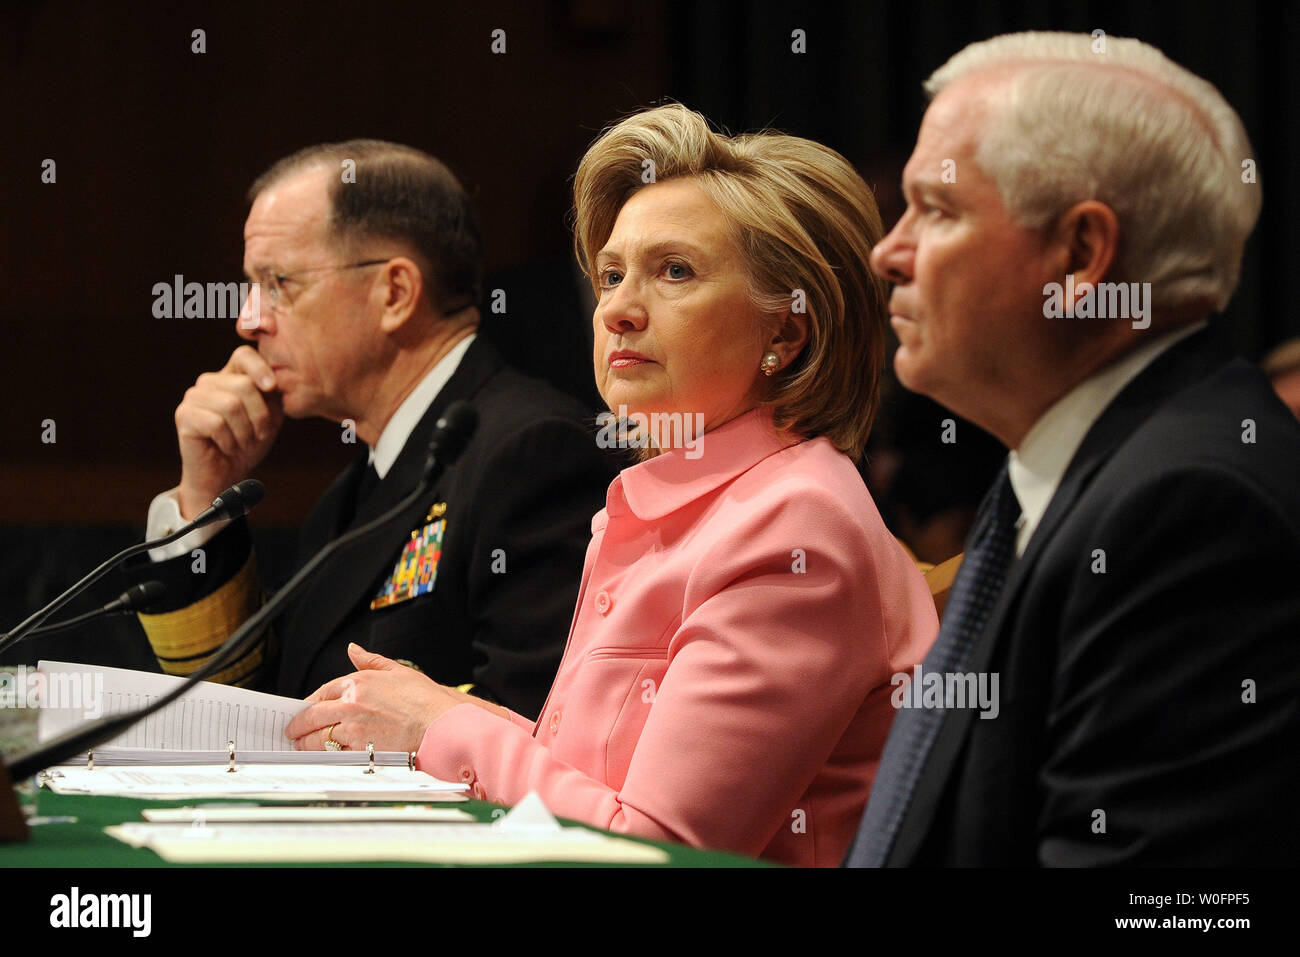 Chairman of the Joint Chiefs of Staff Adm. Michael Mullen, Secretary of State Hillary Rodham Clinton and Secretary of Defense Robert Gates (L to R) testify before the Senate Foreign Relations Committee regarding the new START treaty on Capitol Hill in Washington on May 18, 2010. The Strategic Arms Reduction Treaty (START) between the U.S. and Russia, aimed at reducing nuclear arms, was signed in Prague on April 8, 2010.   UPI/Roger L. Wollenberg Stock Photo